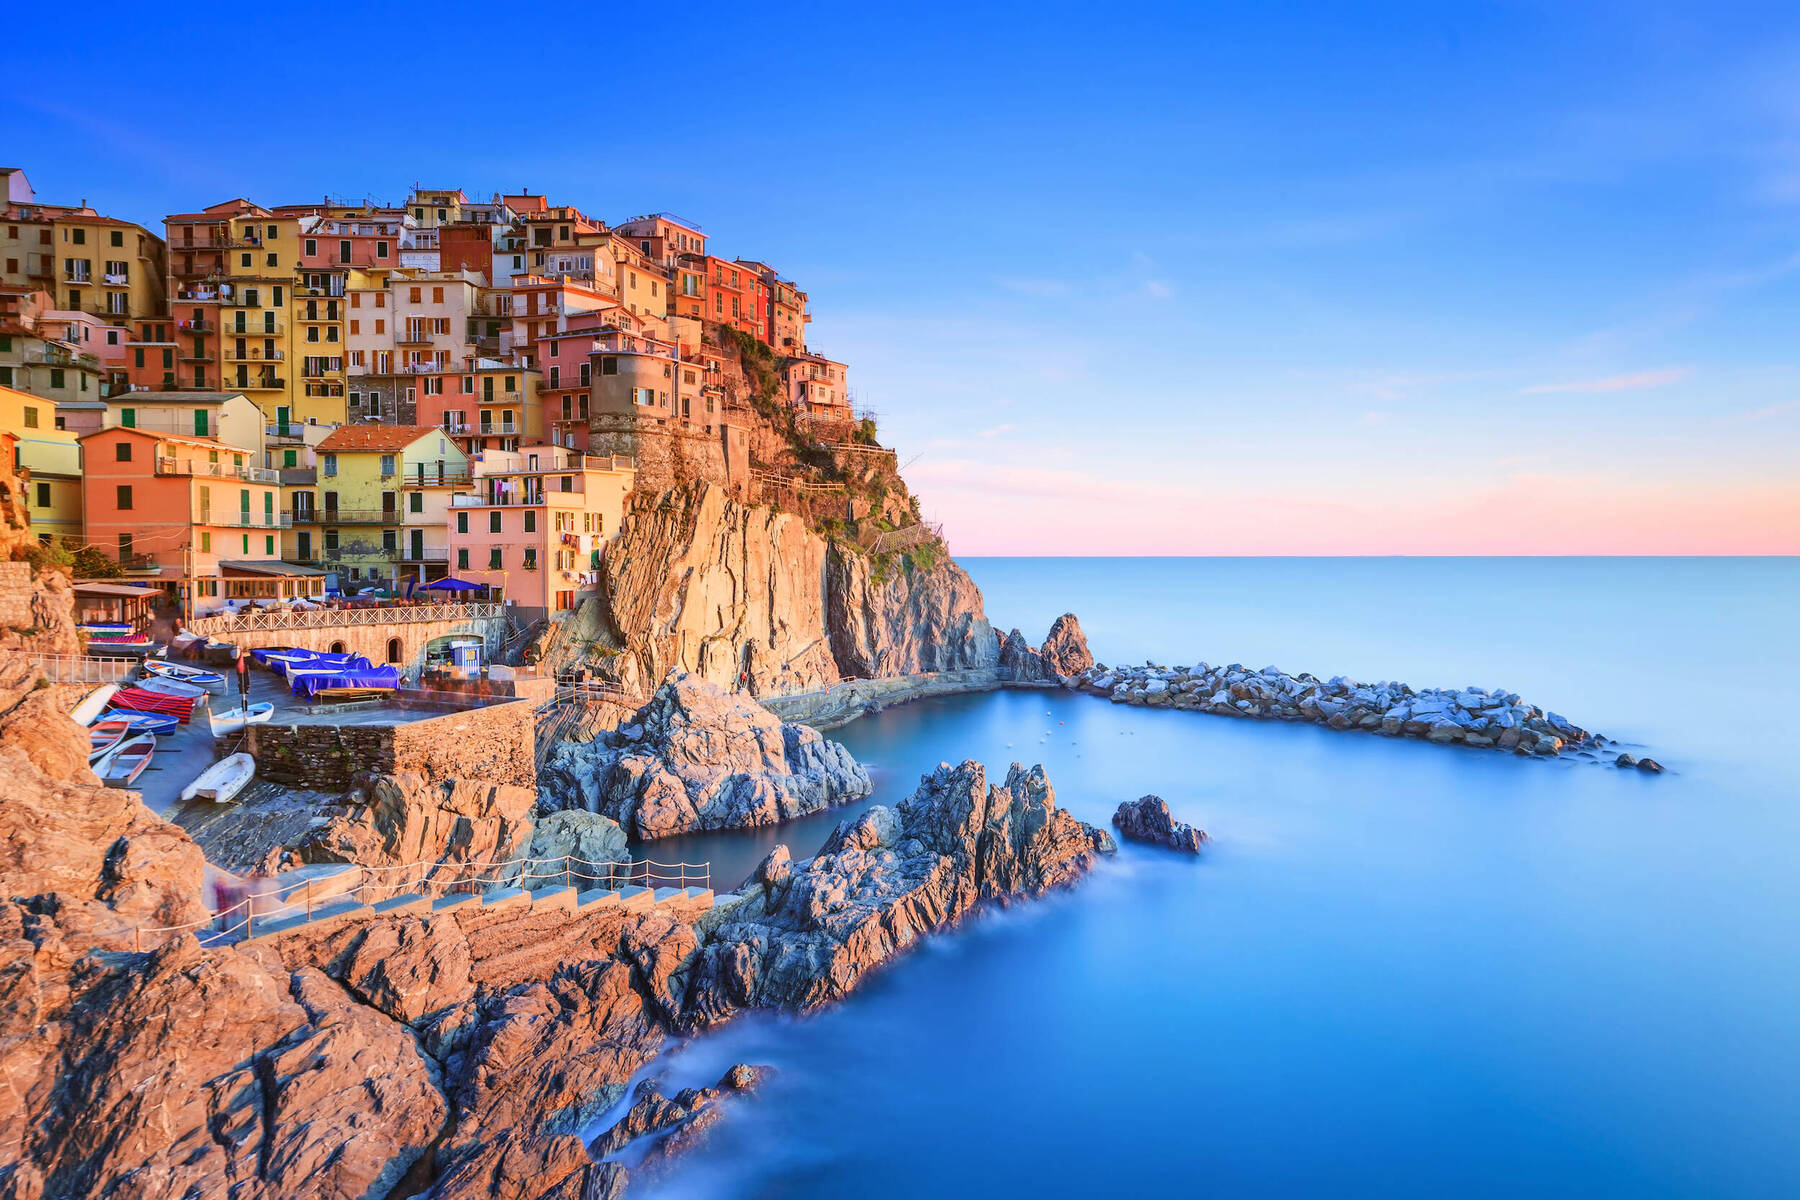 Cinque Terre: Where to hike and where to dine